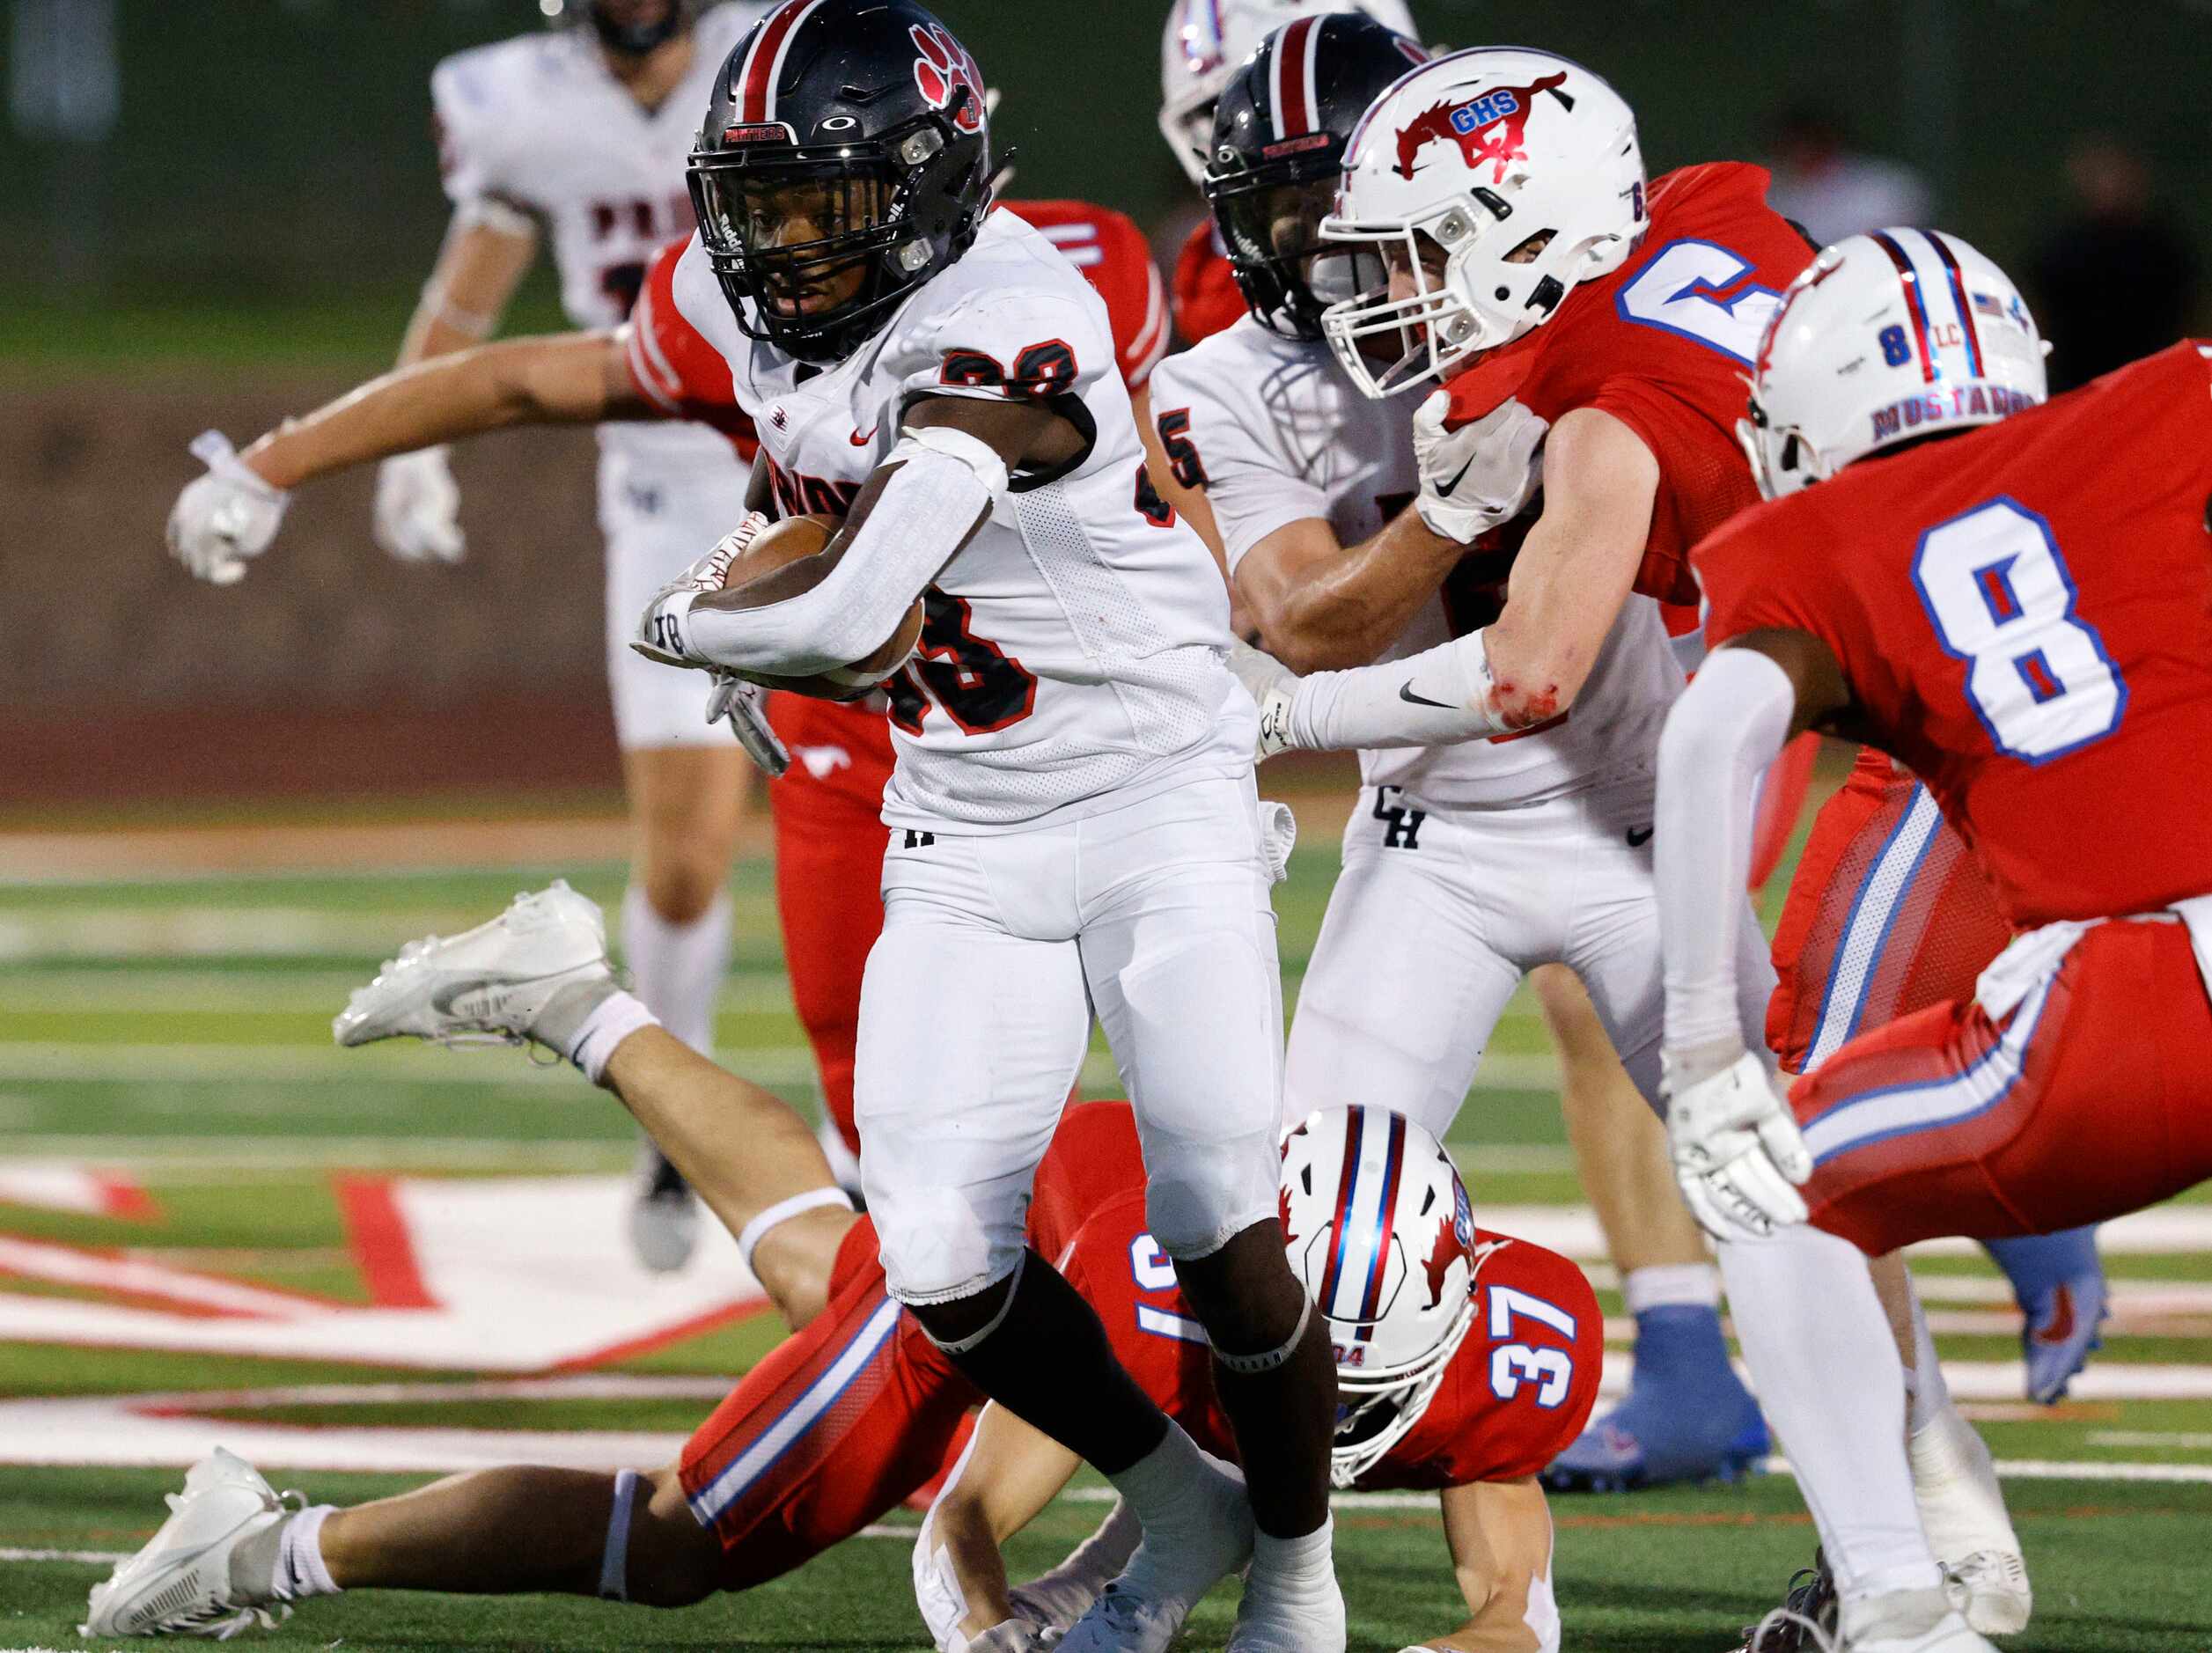 Colleyville Heritage's Colin Bennett (33) carries the ball as Grapevine defense players try...